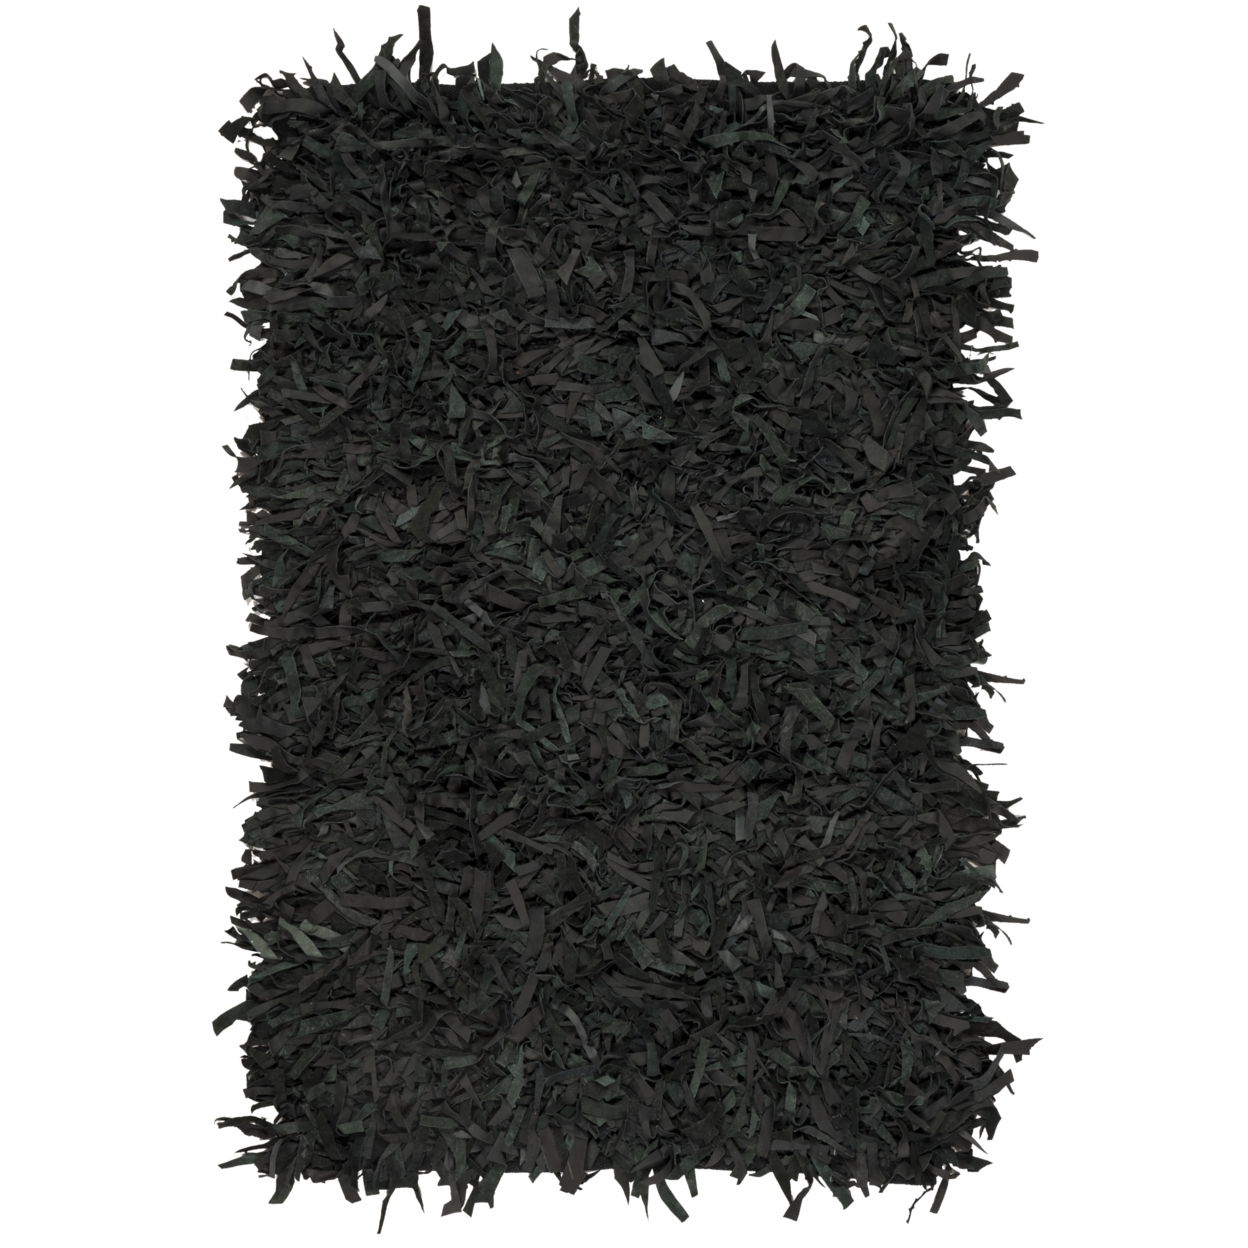 SAFAVIEH Leather Shag LSG601A Hand-knotted Black Rug - 3' X 5'